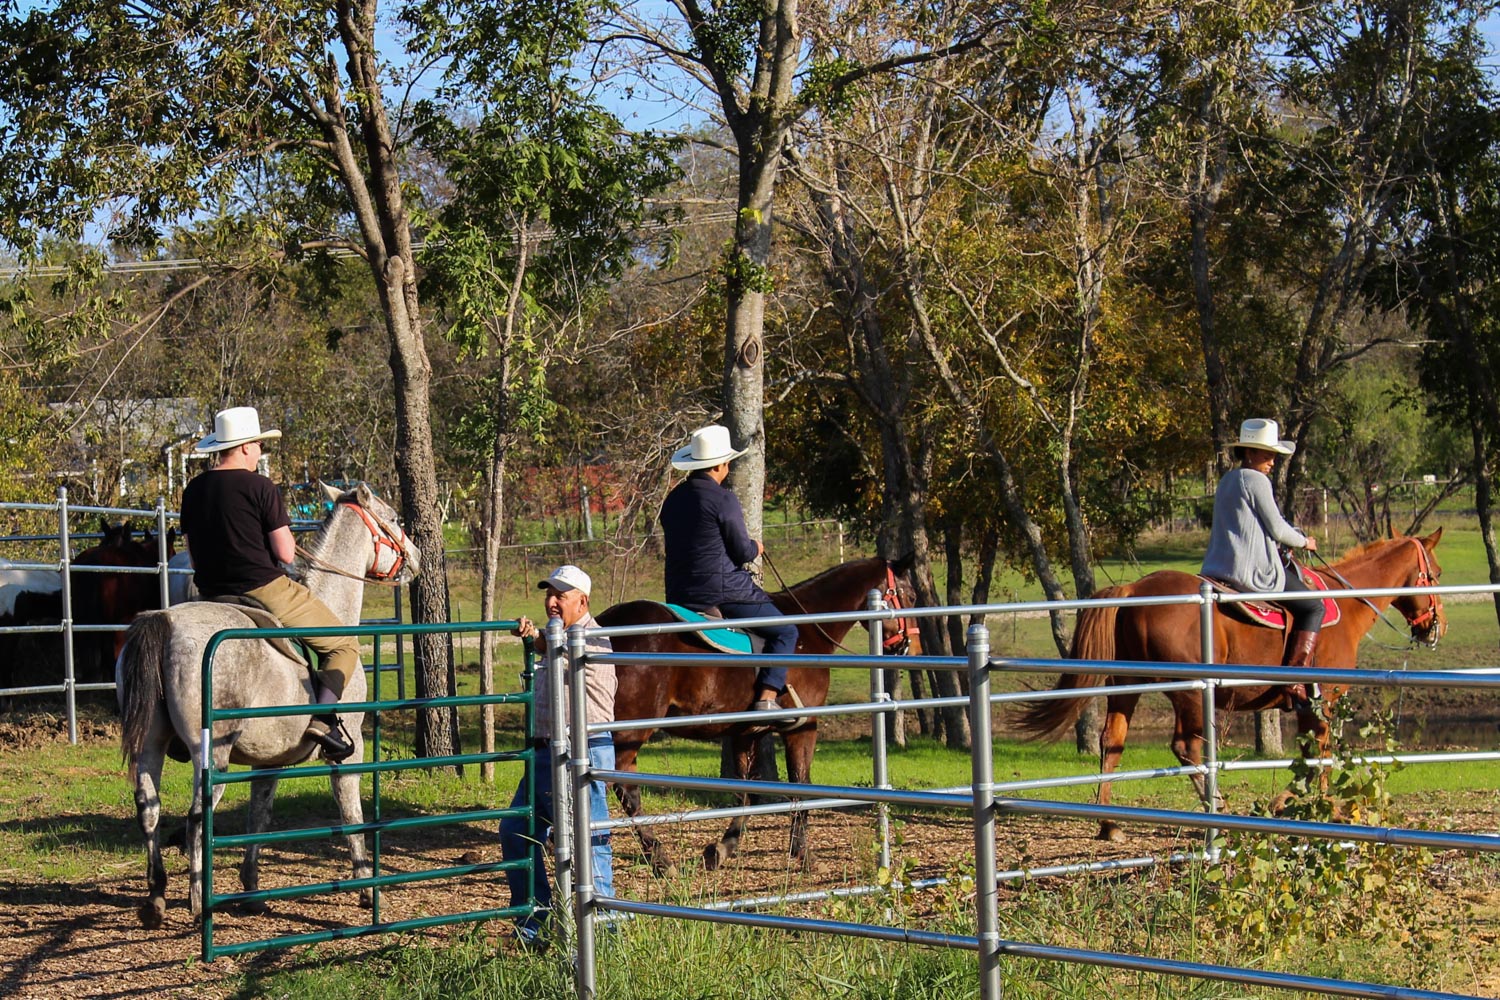 An afternoon trail ride at Texas Horse Park © Shanna Jones / Lonely Planet